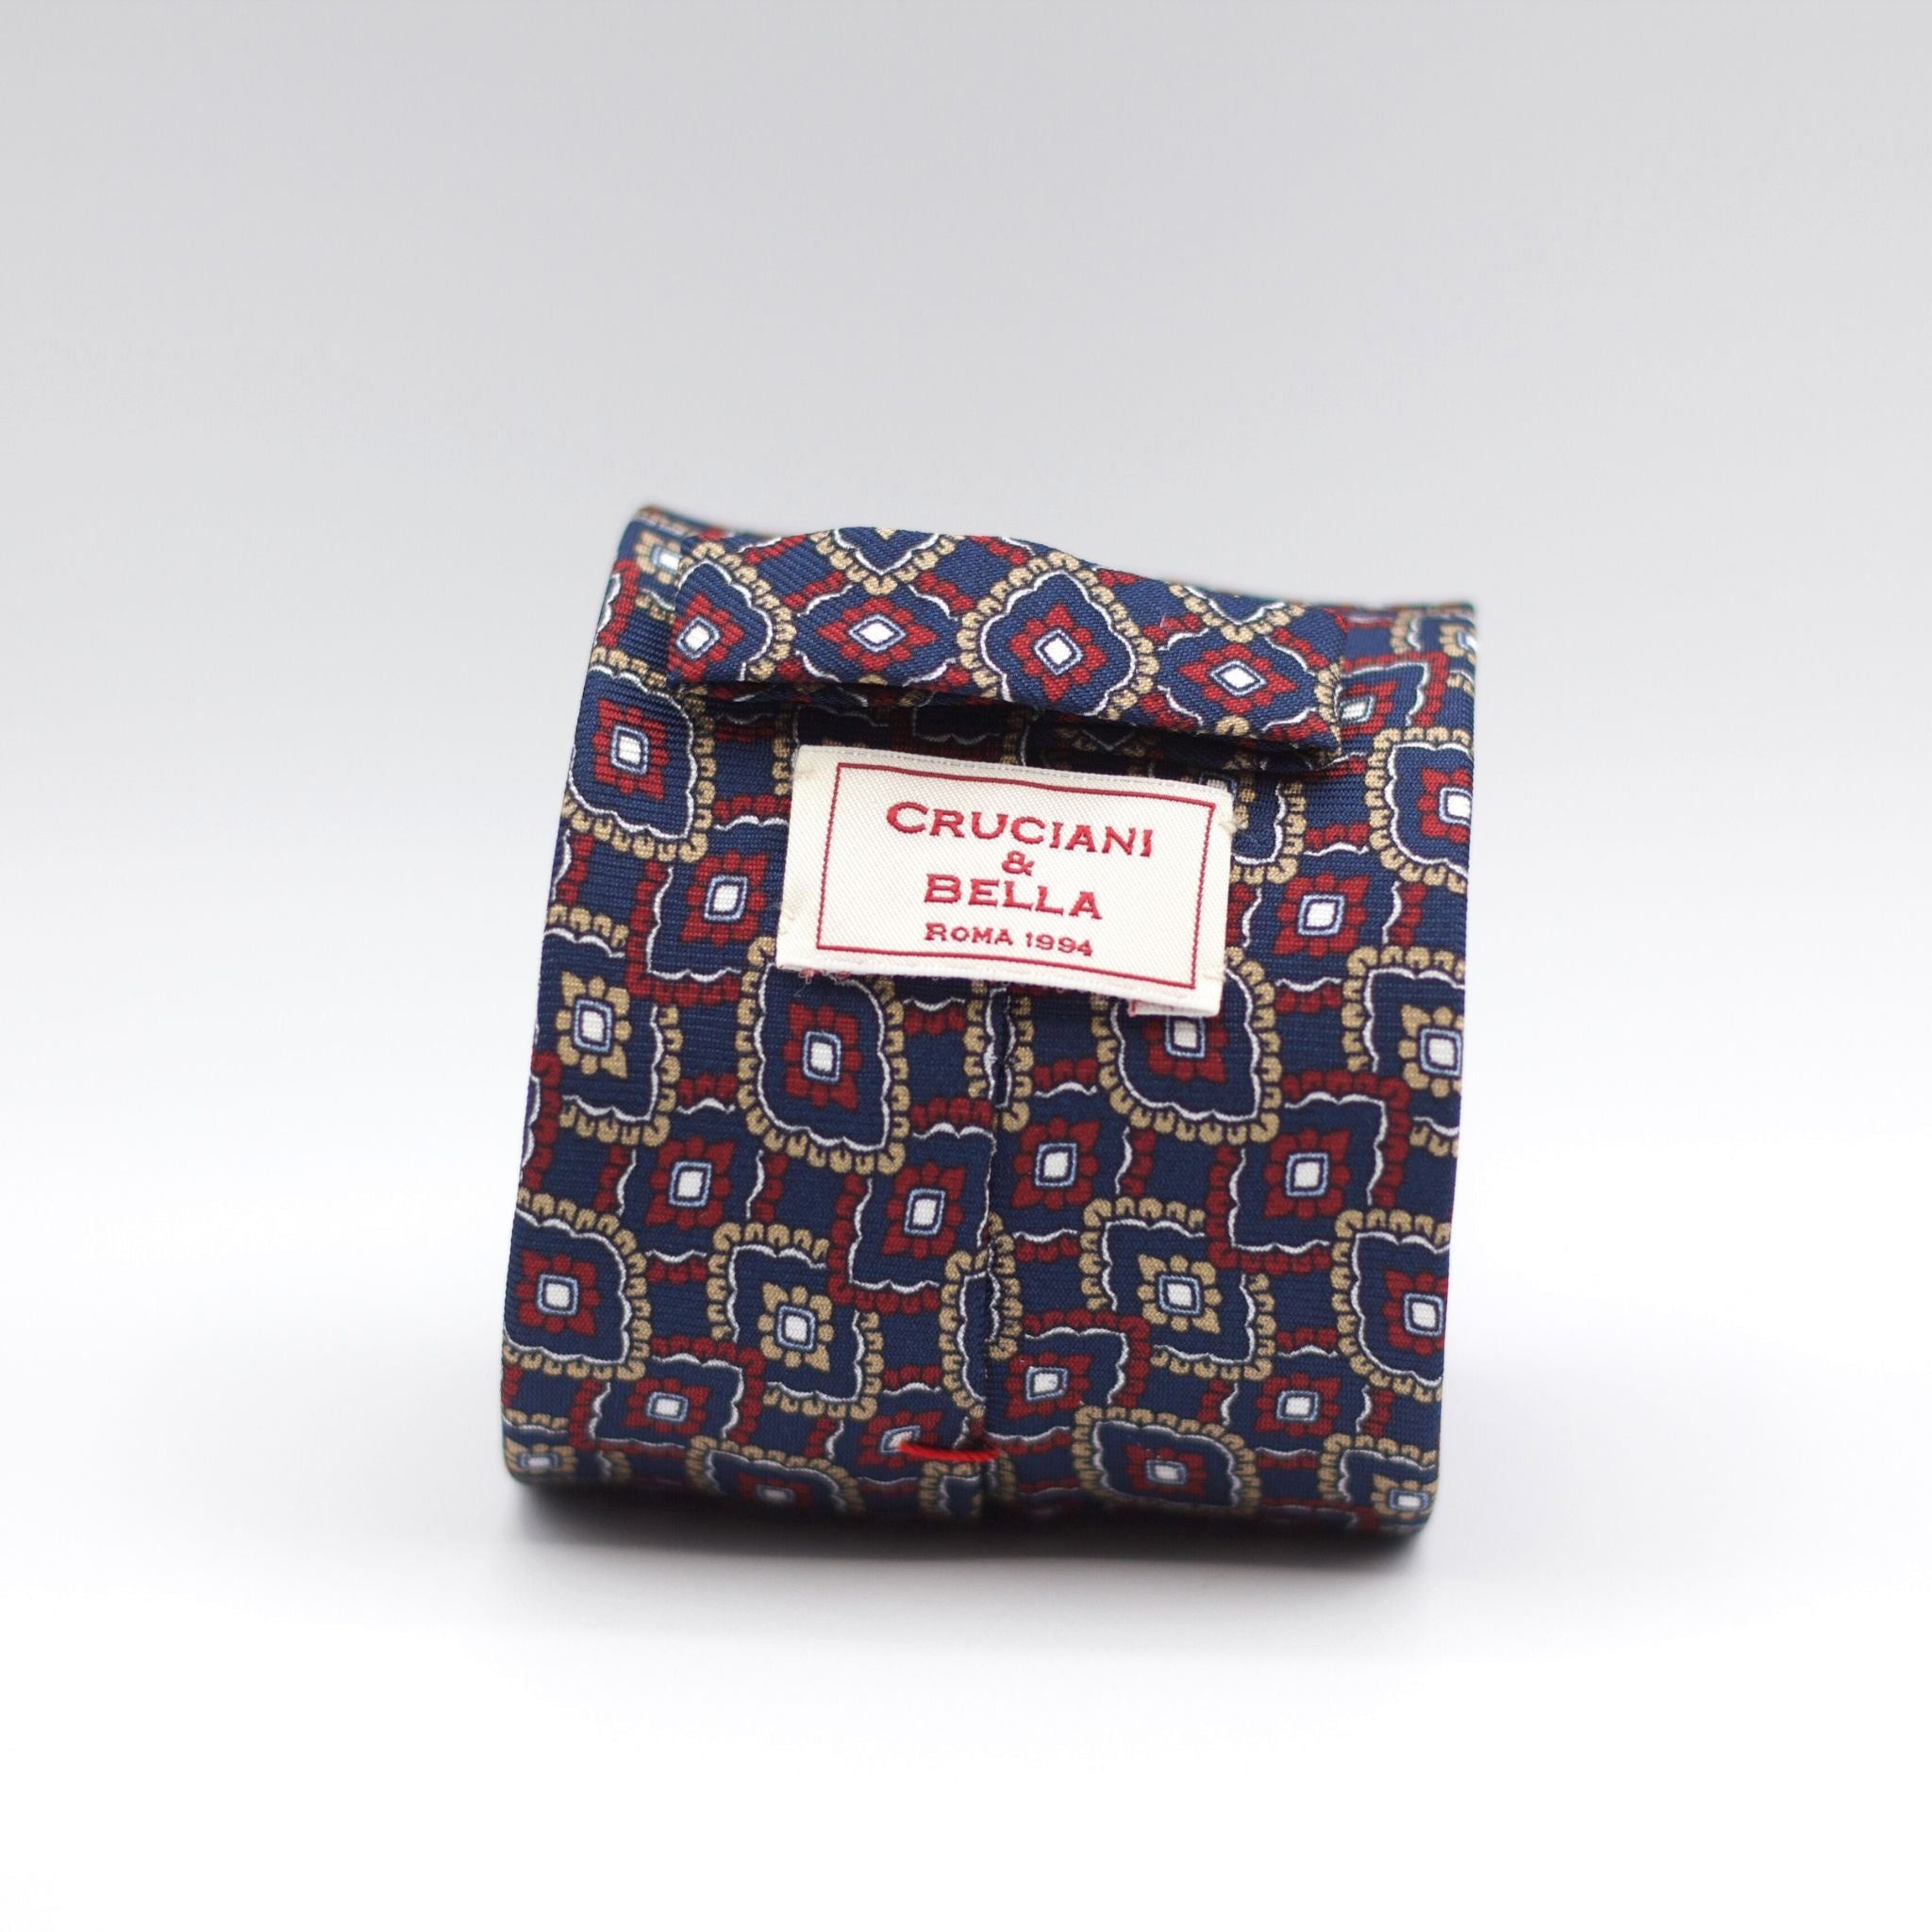 Cruciani & Bella 100% Silk Printed Self-Tipped Blue, Beige, Red and White Motif Tie Handmade in Rome, Italy. 8 cm x 150 cm